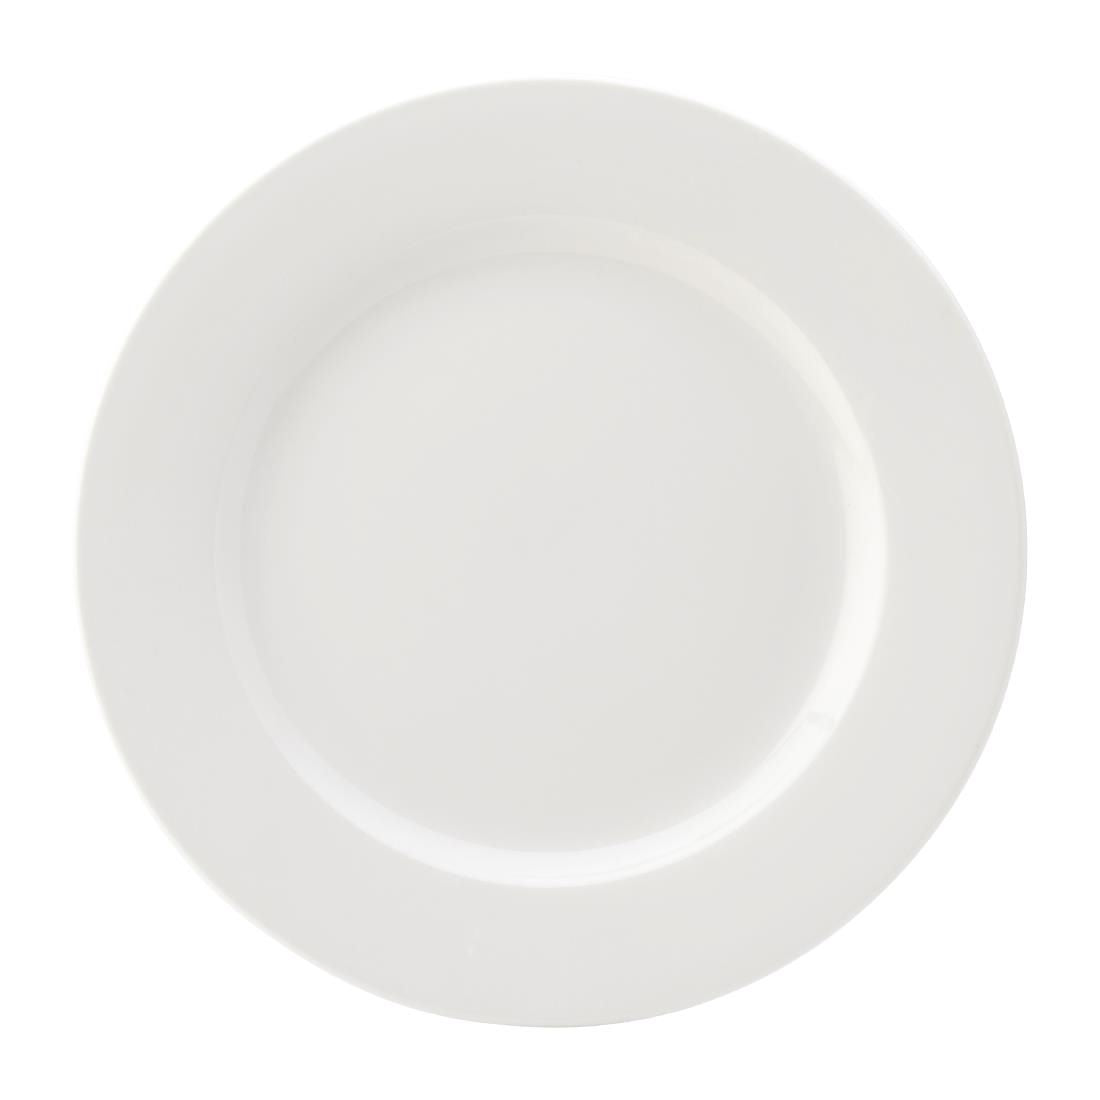 DY345 Utopia Titan Winged Plates White 280mm (Pack of 6)